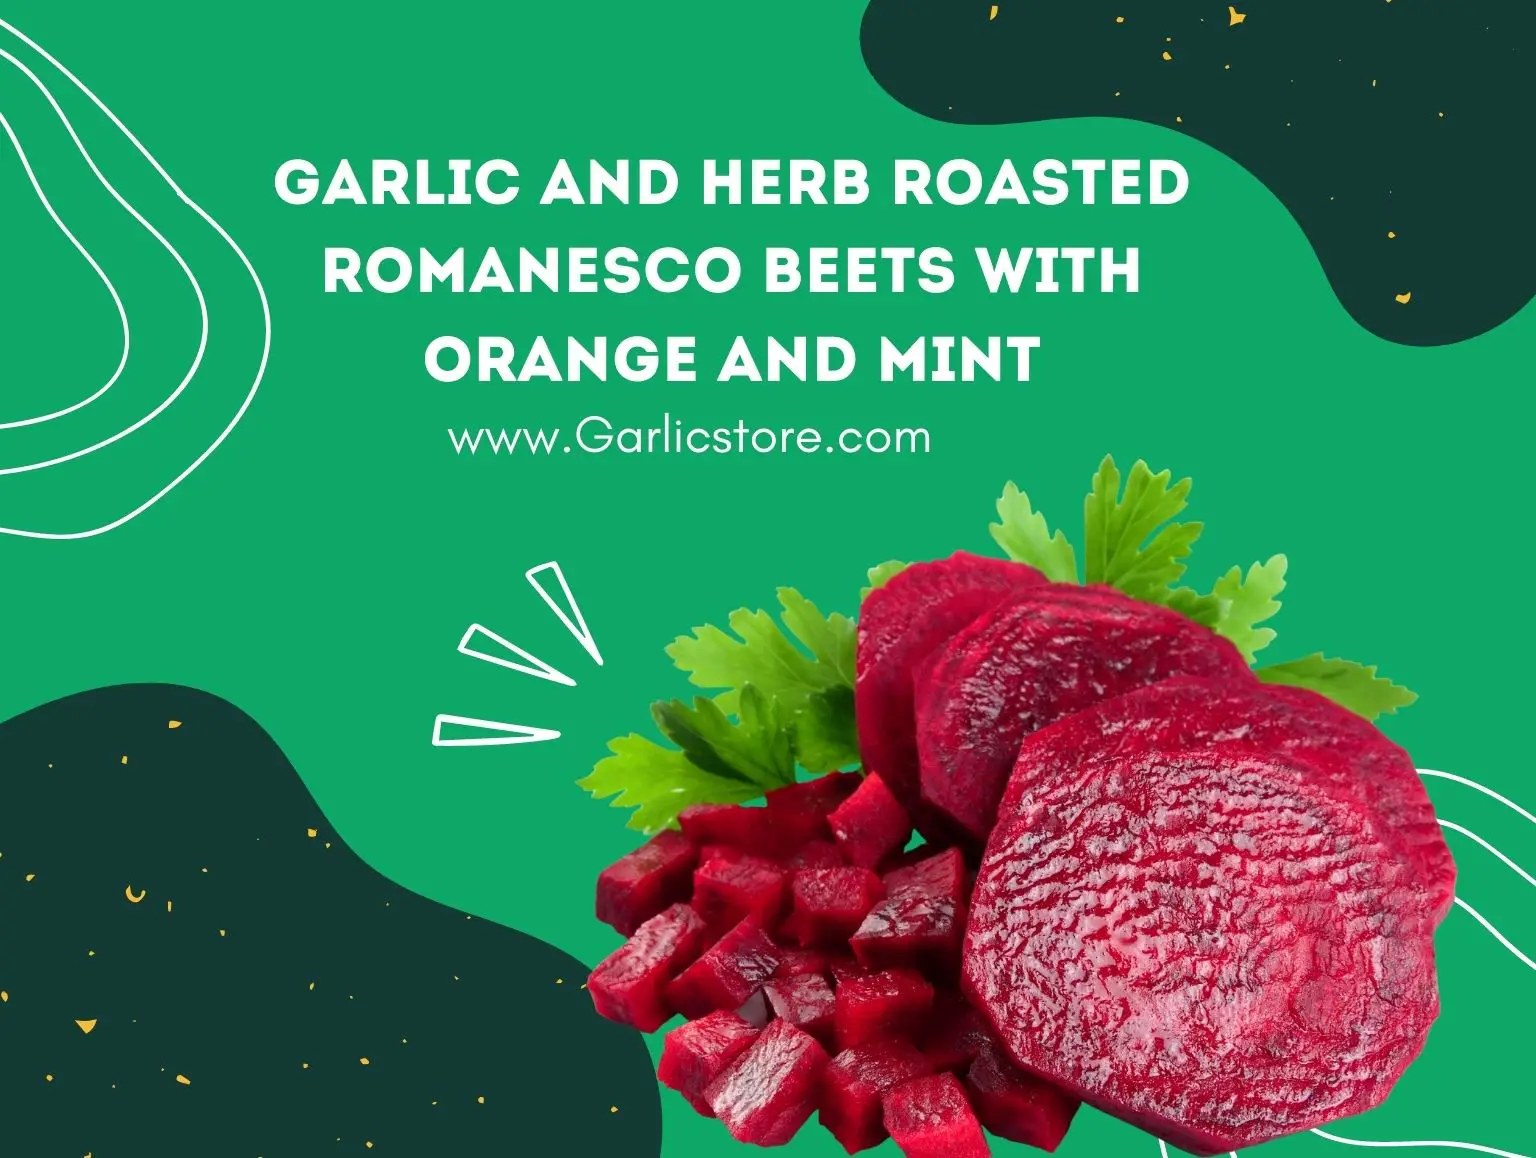 Garlic and Herb Roasted Romanesco Beets with Orange and Mint